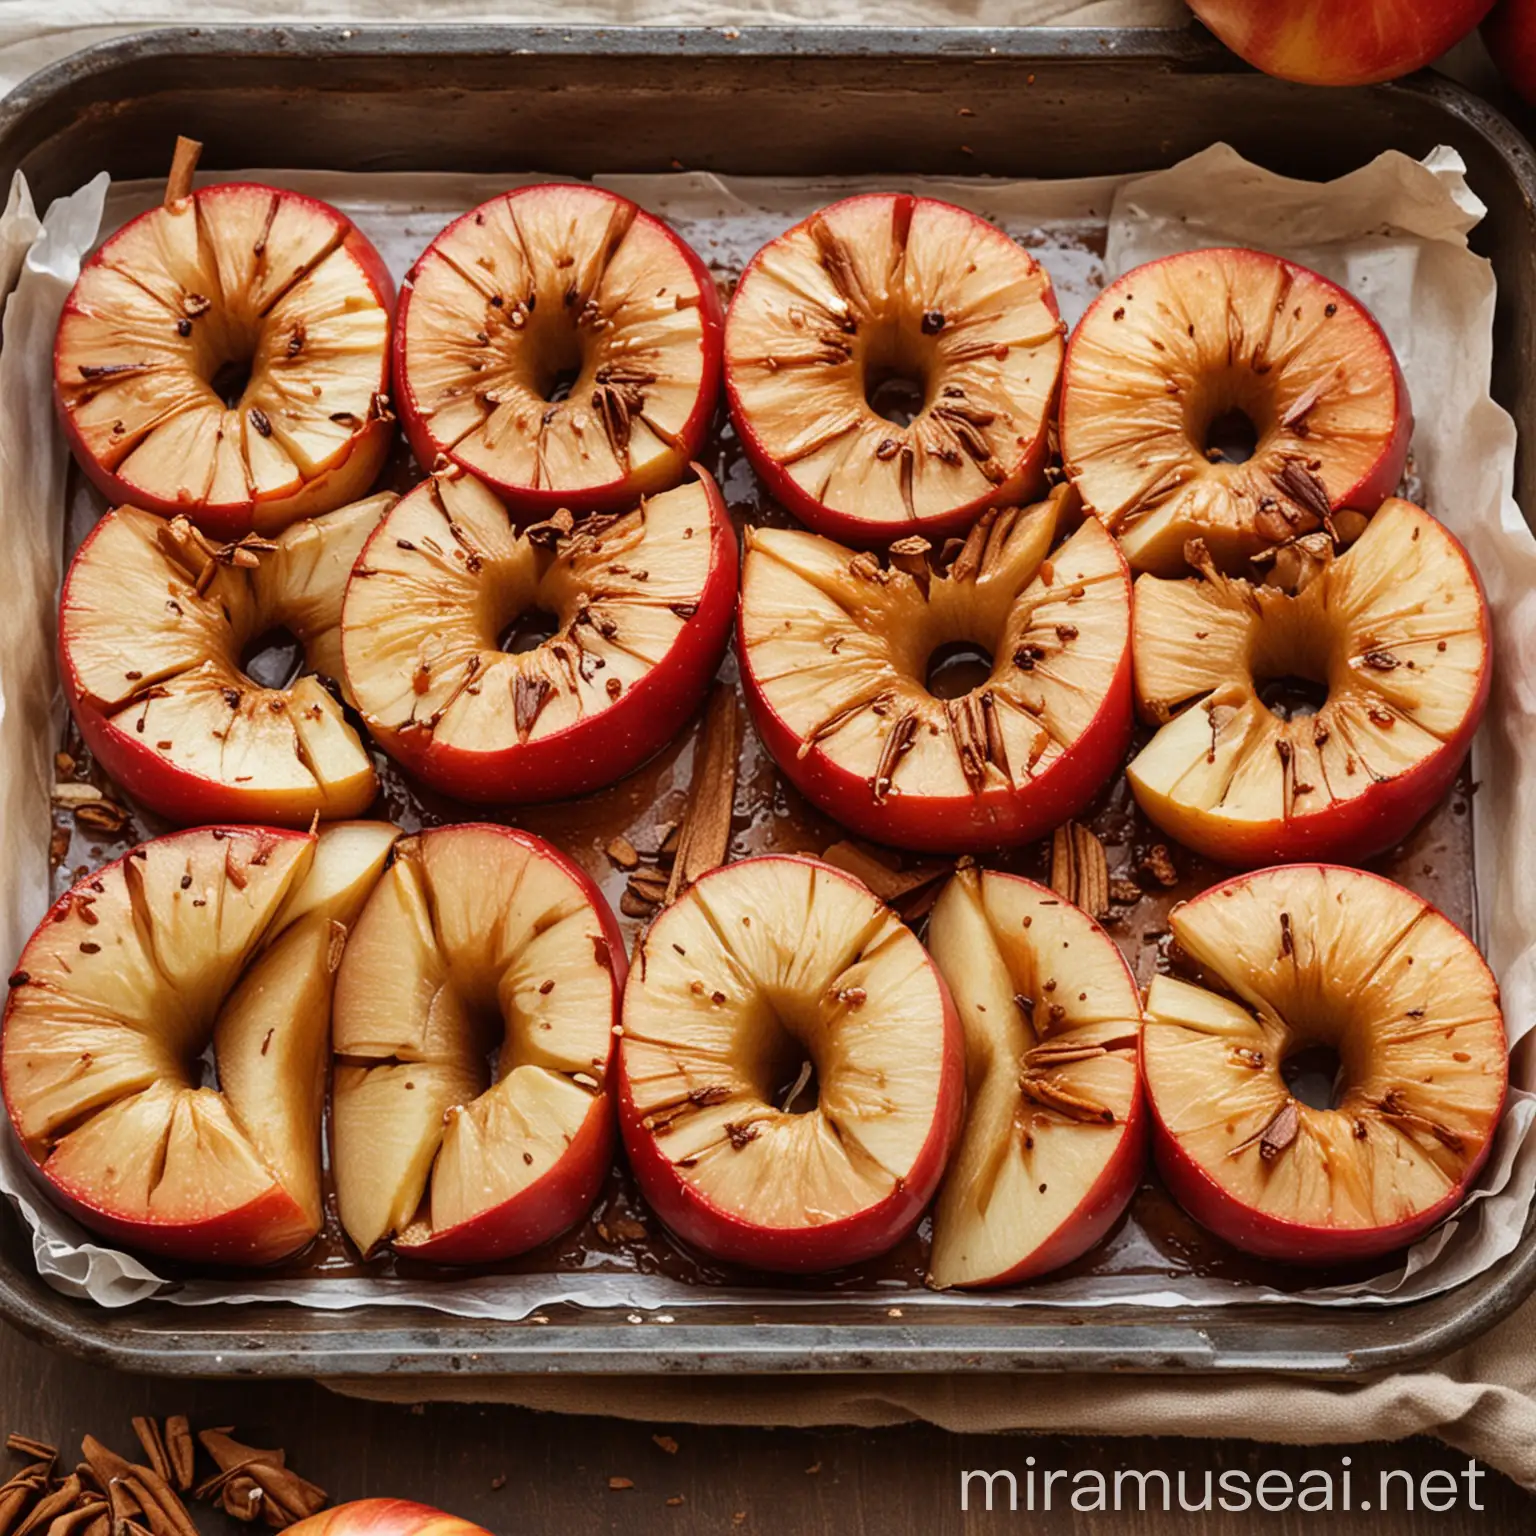 Delicious Baked Sliced Apples with Cinnamon Rustic Autumn Dessert